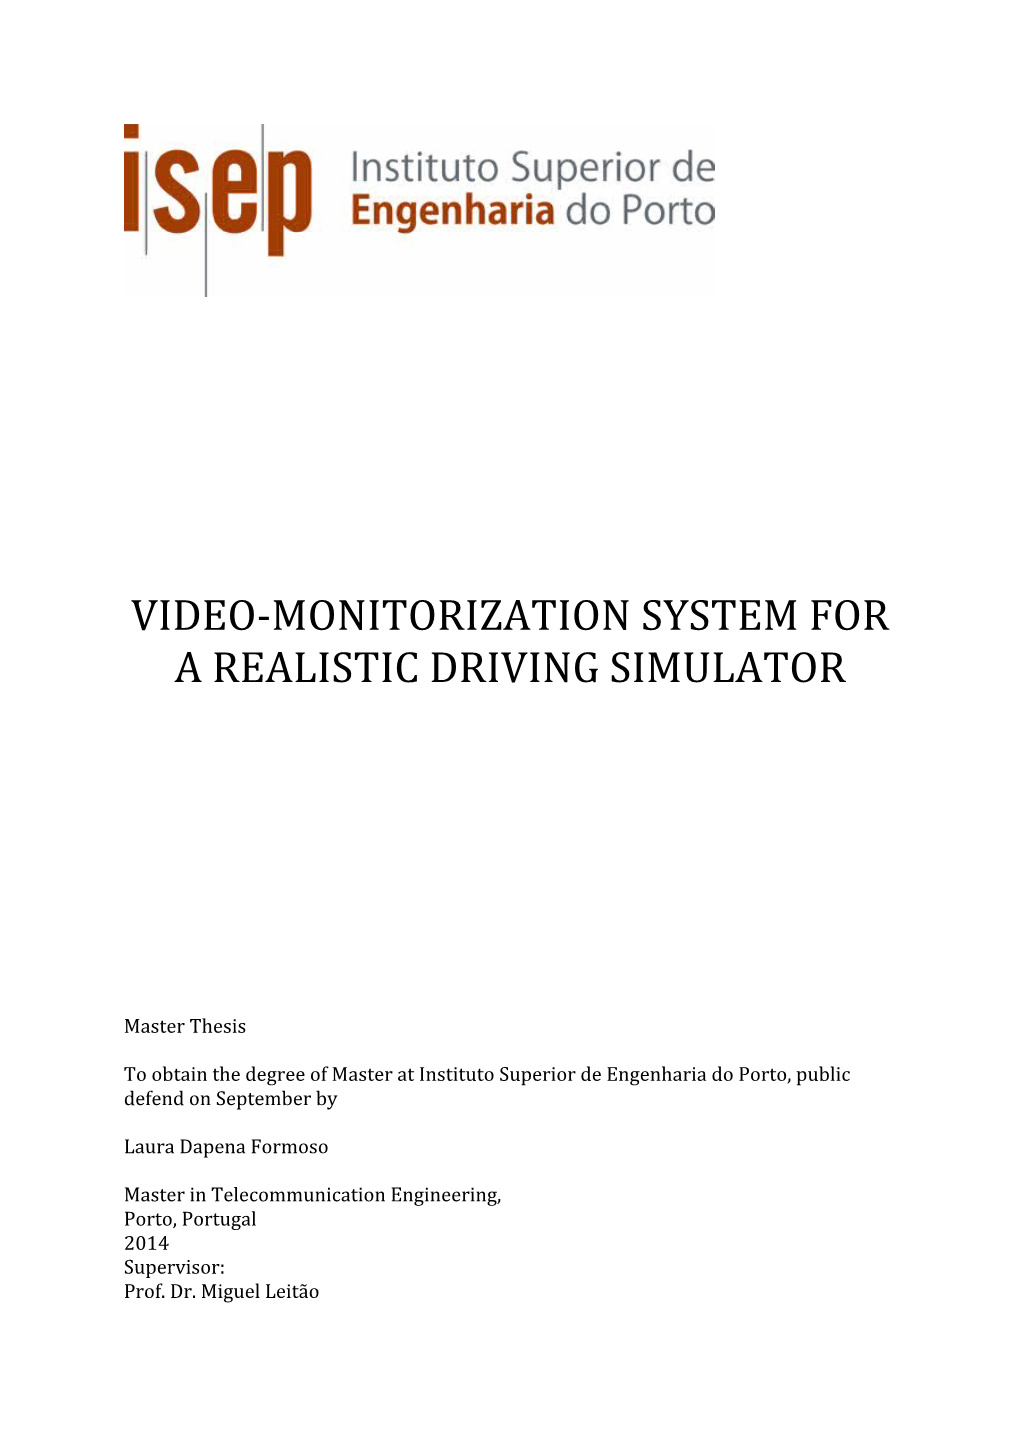 Video-‐Monitorization System for a Realistic Driving